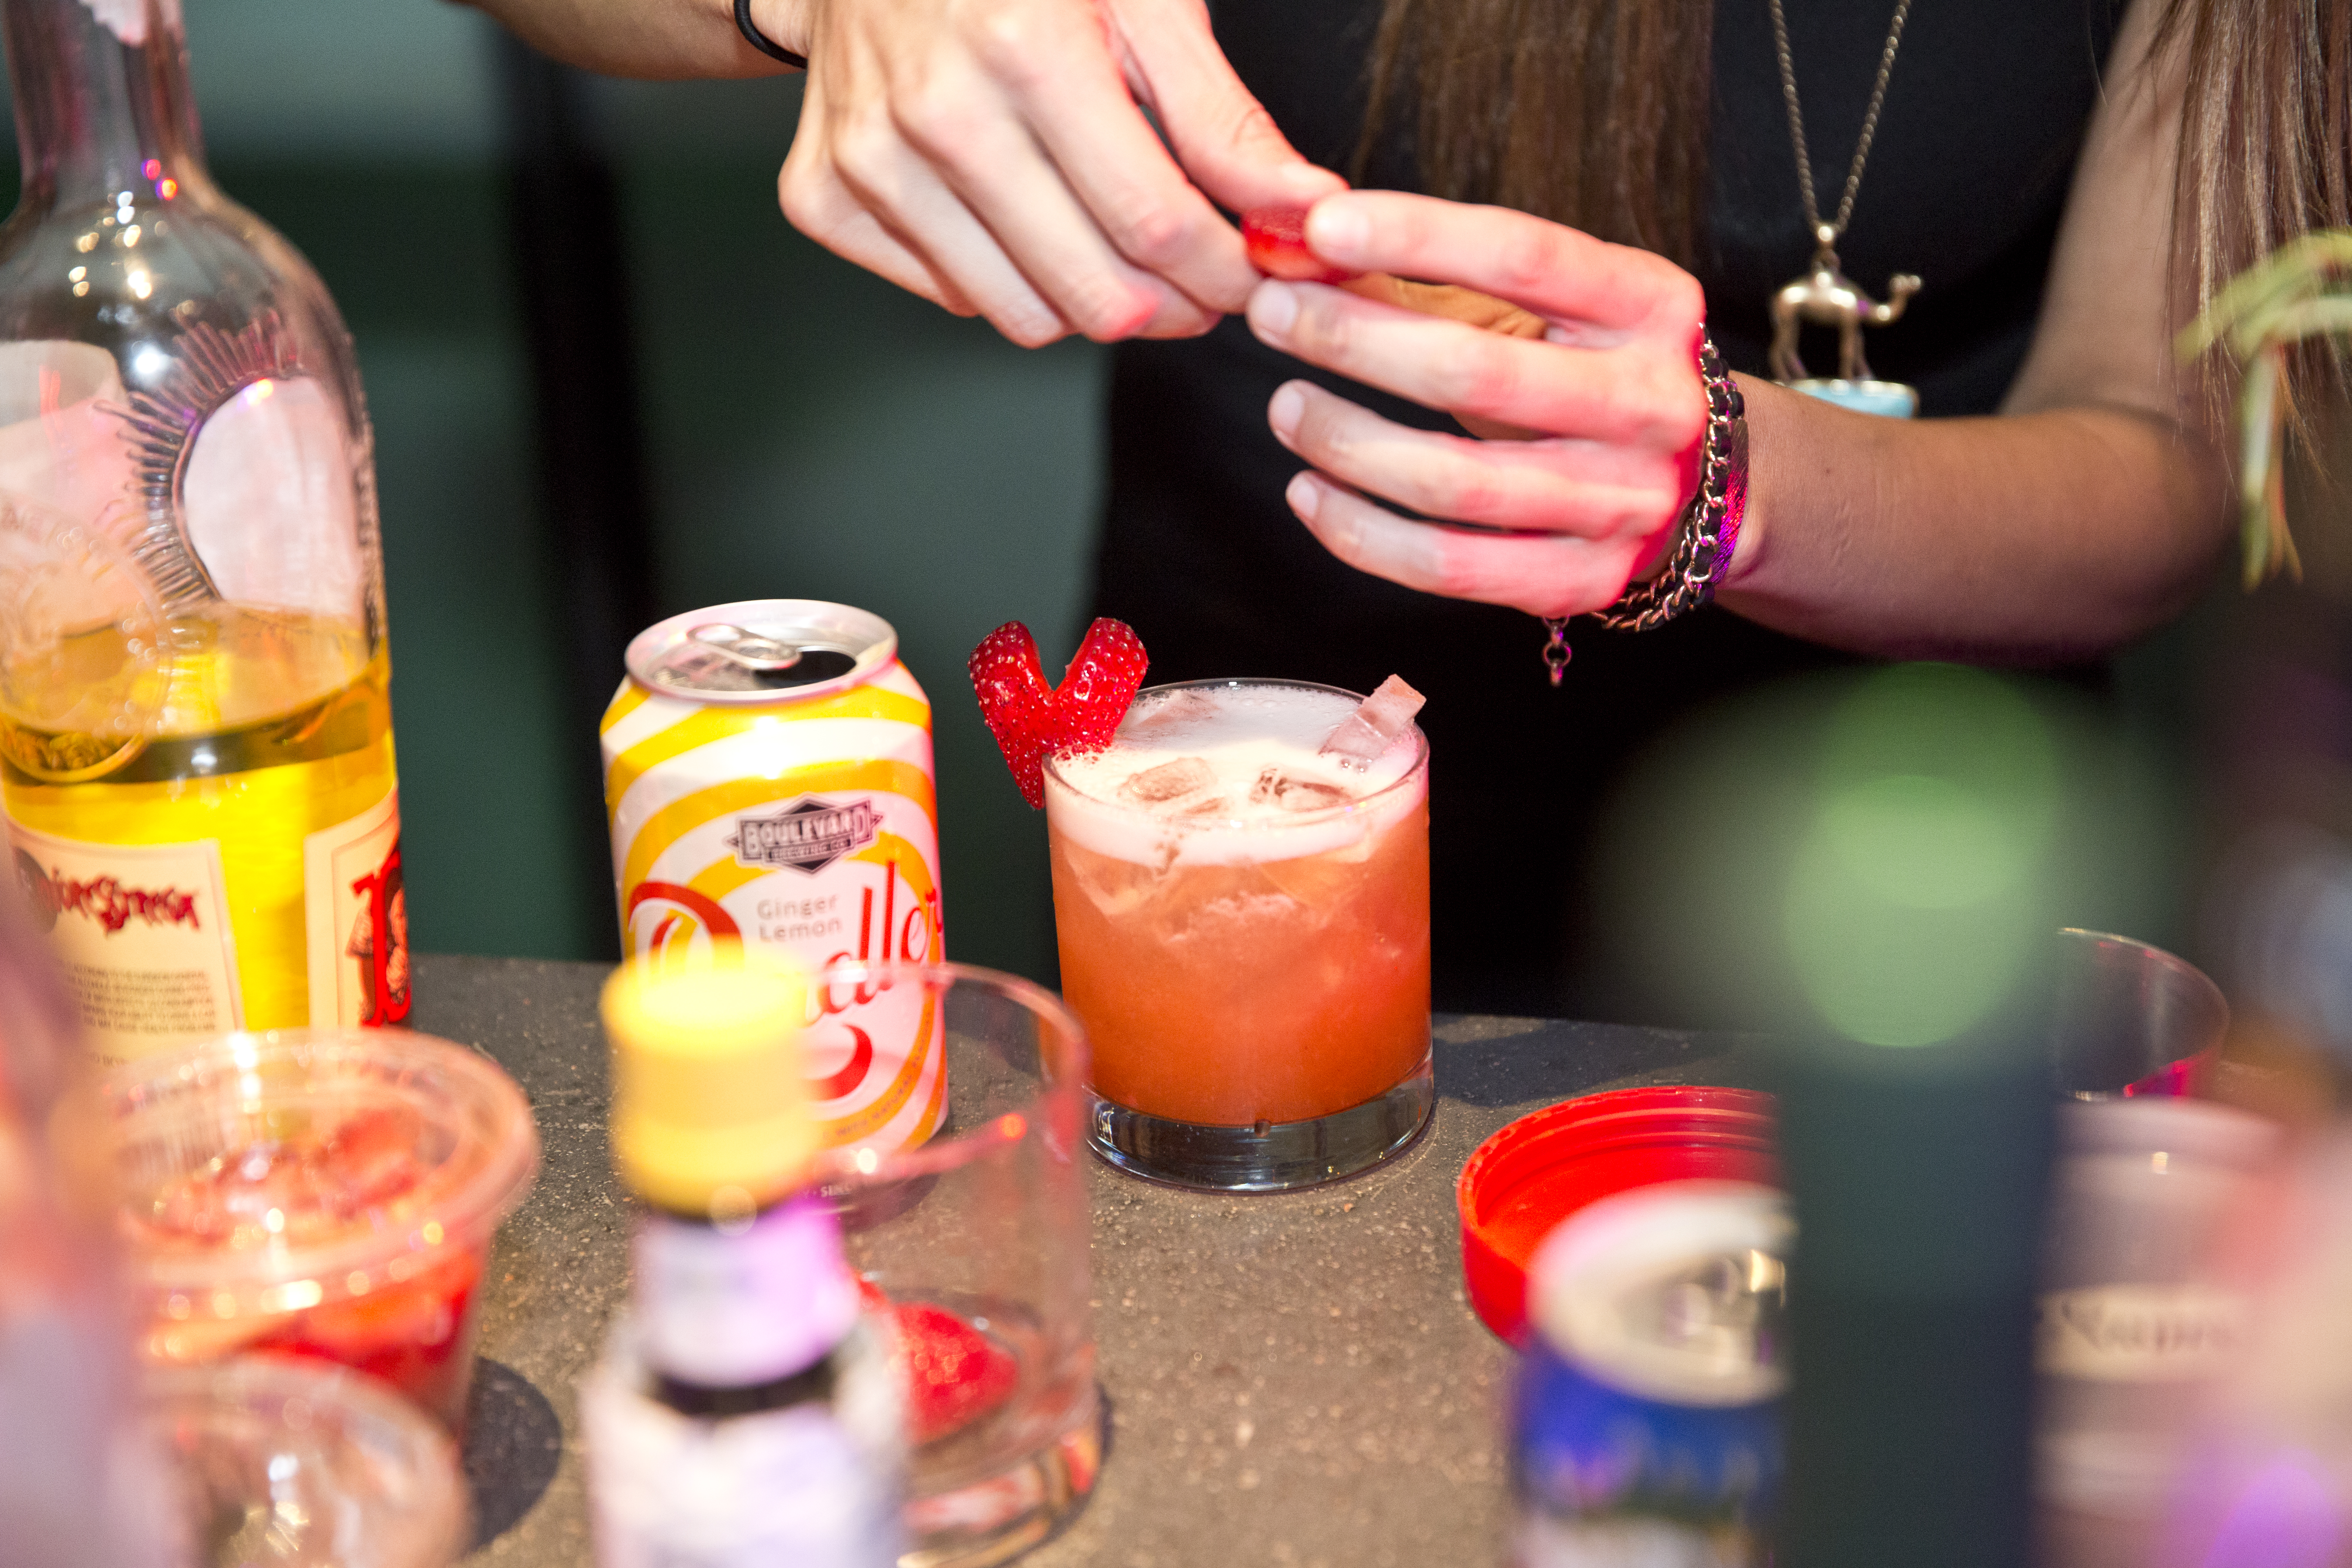 Hands prepare a blood orange colored cocktail on a cluttered bar. The drink is garnished with a strawberry in the shape of a heart.